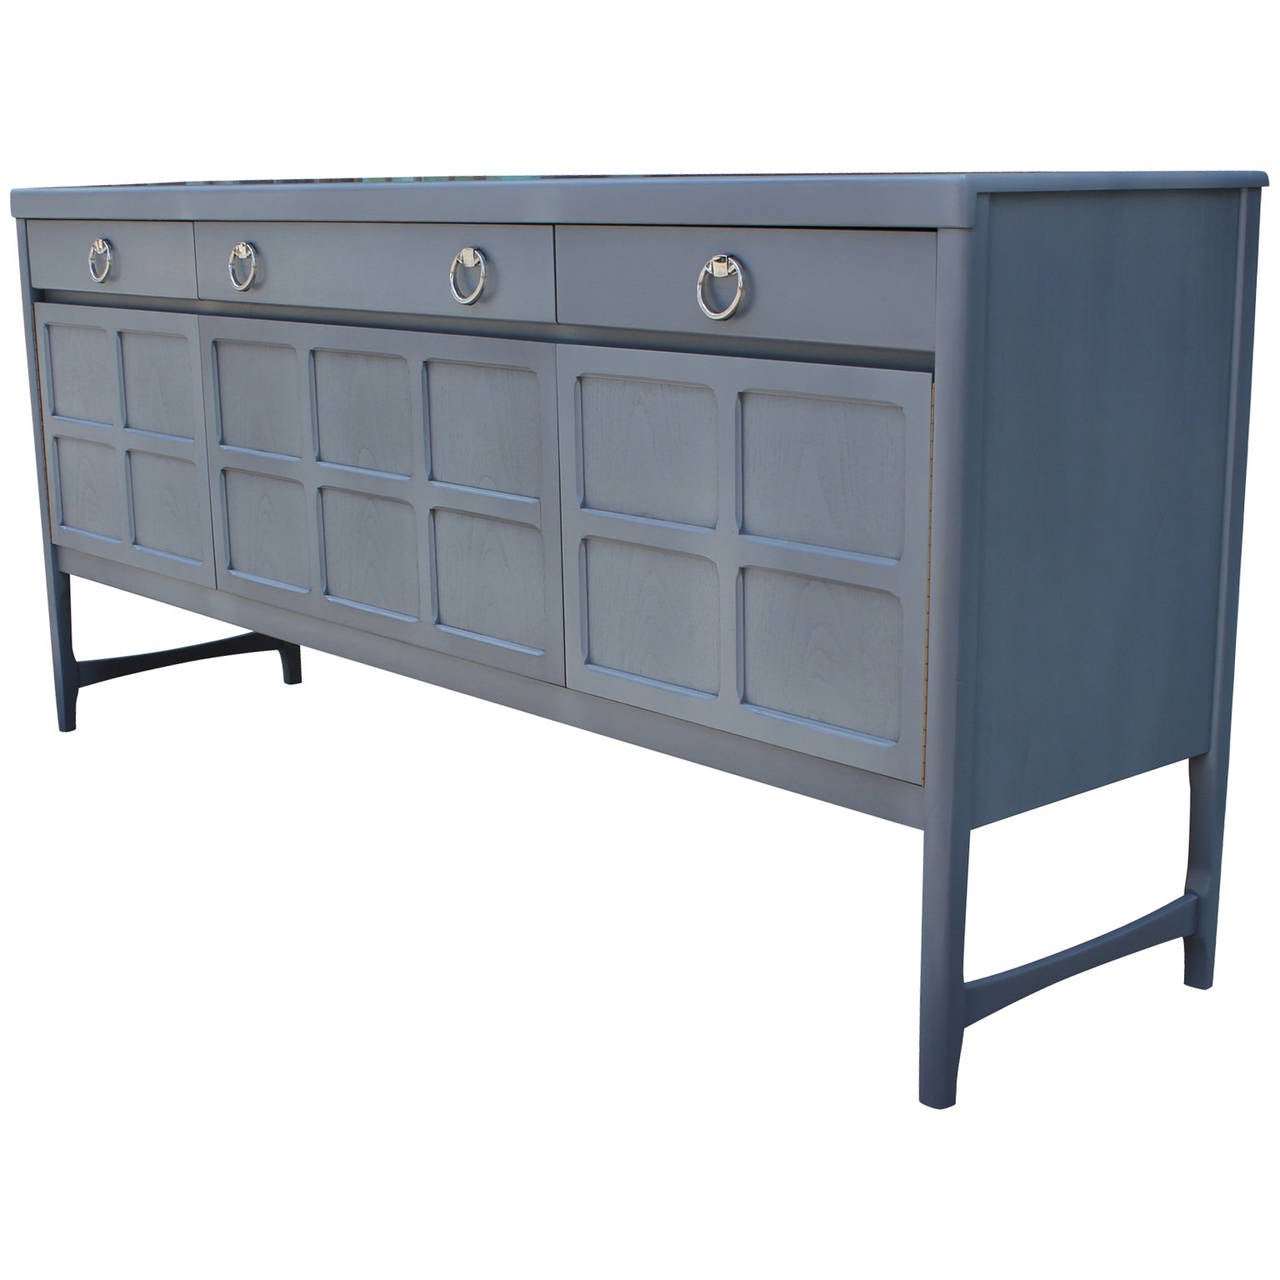 Light grey-blue sideboard with chrome handles. Sideboard or Credenza is made out of mahogany and teak. The piece has been stained a beautiful pale French Blue Grey color fully restored. Chrome handles. Front middle cabinet door drops down.